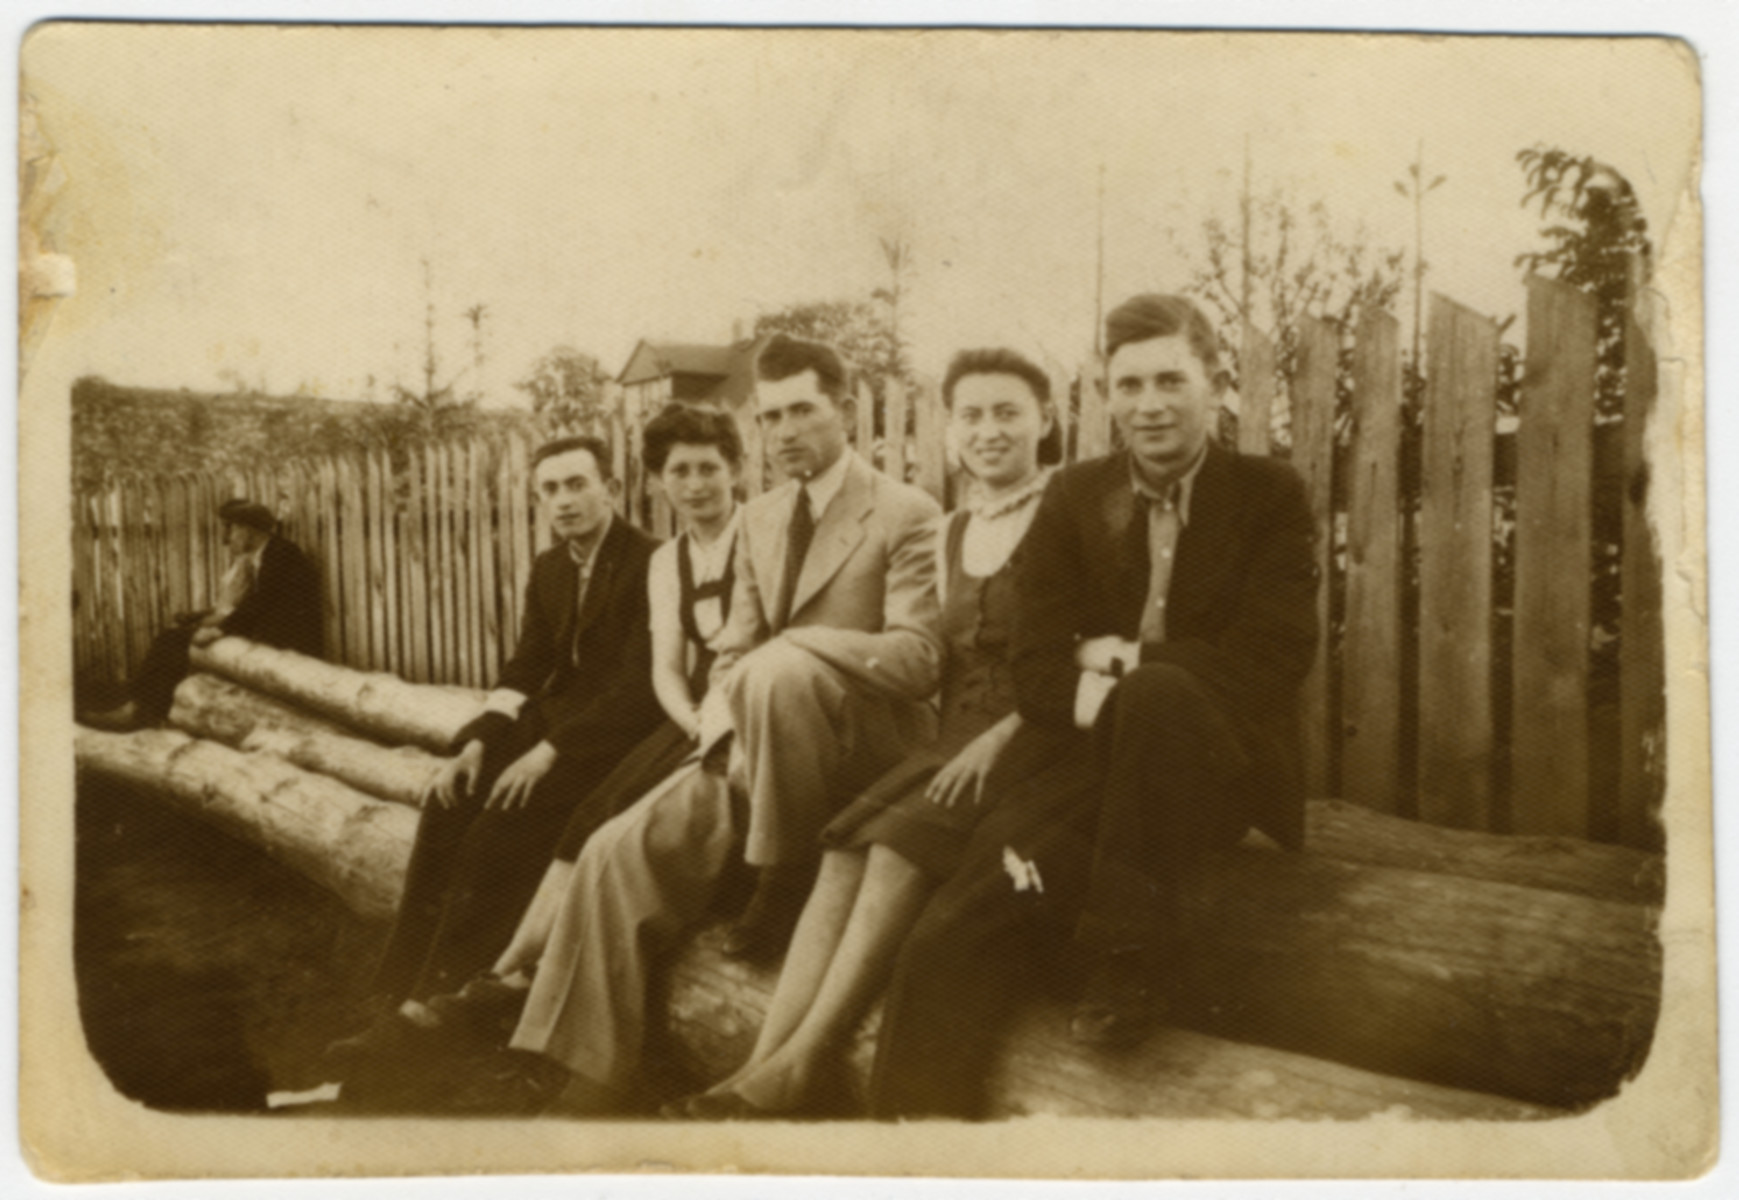 The Luksenburg family poses on some large logs shortly before the start of World War II.

Pictured from left to right are a friend (name unknown), Rivka, Mosche, (unidentified) and Kopel Luksenburg.